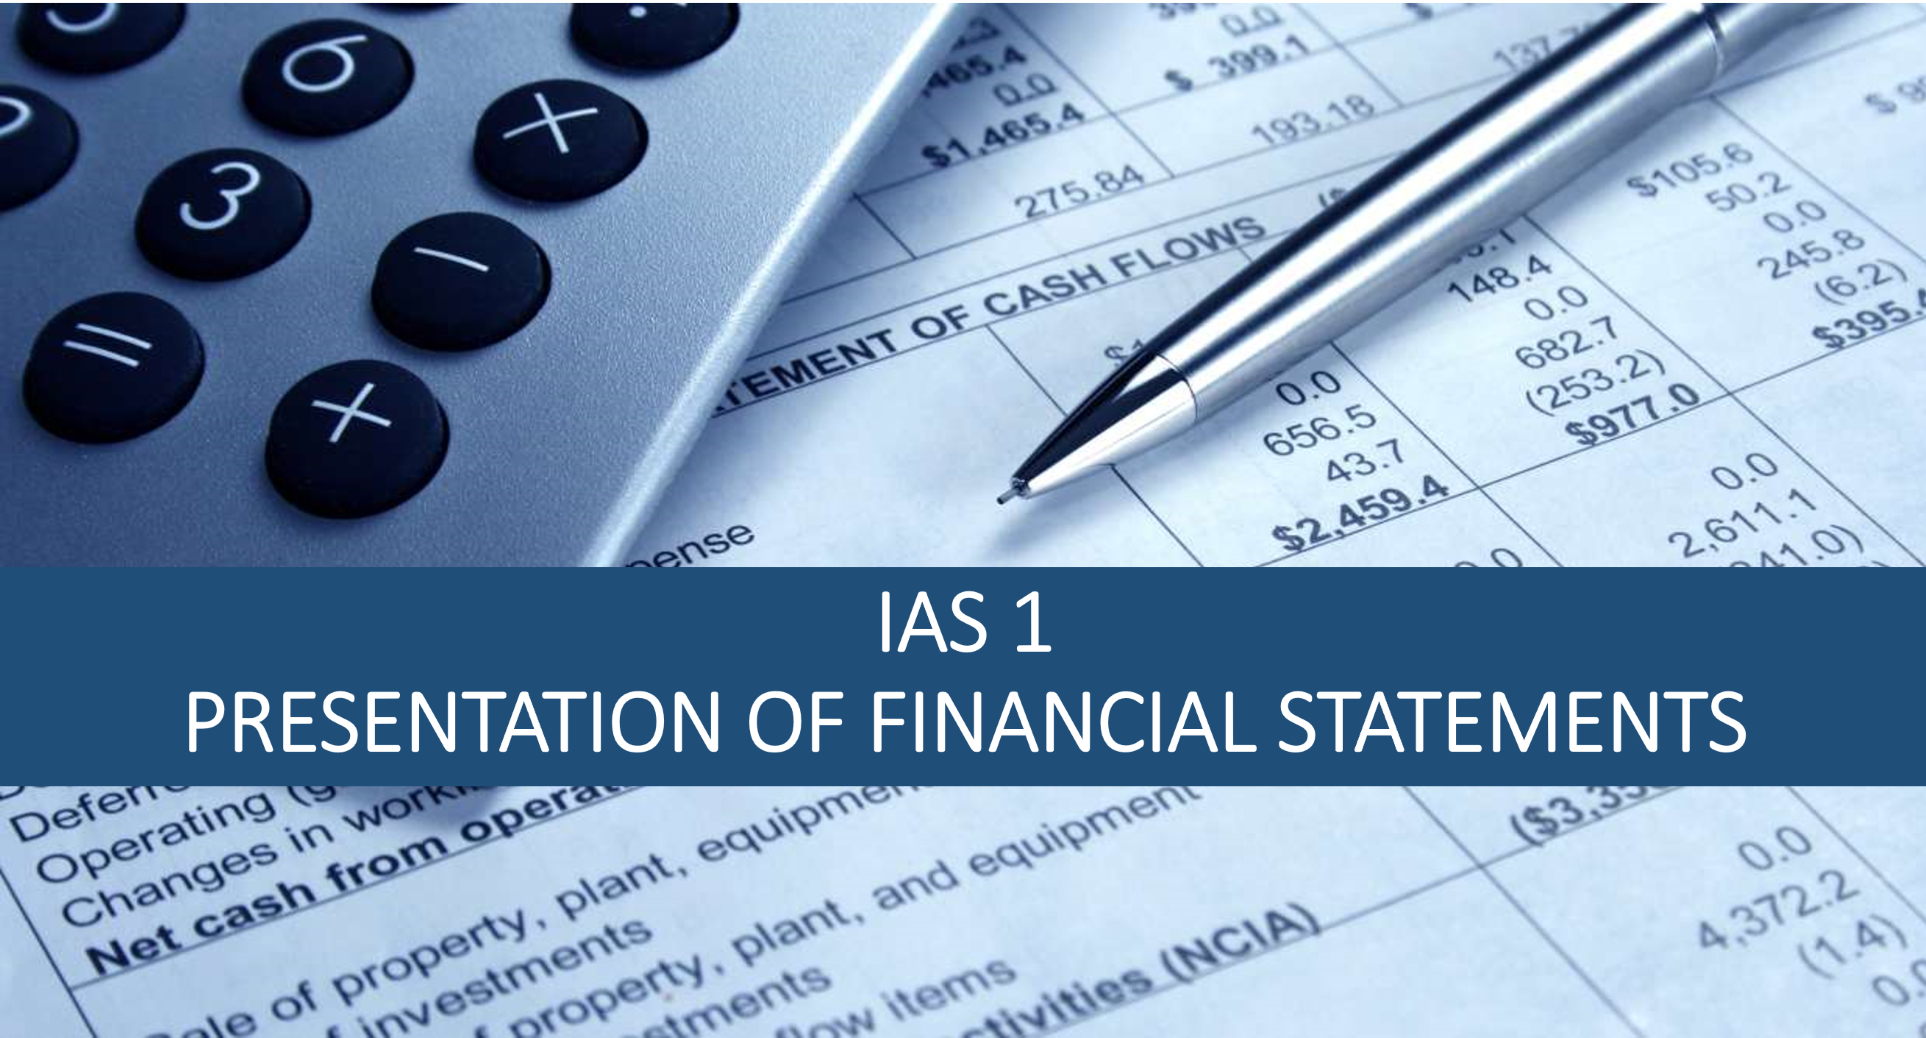 ias 1 presentation of financial statements example